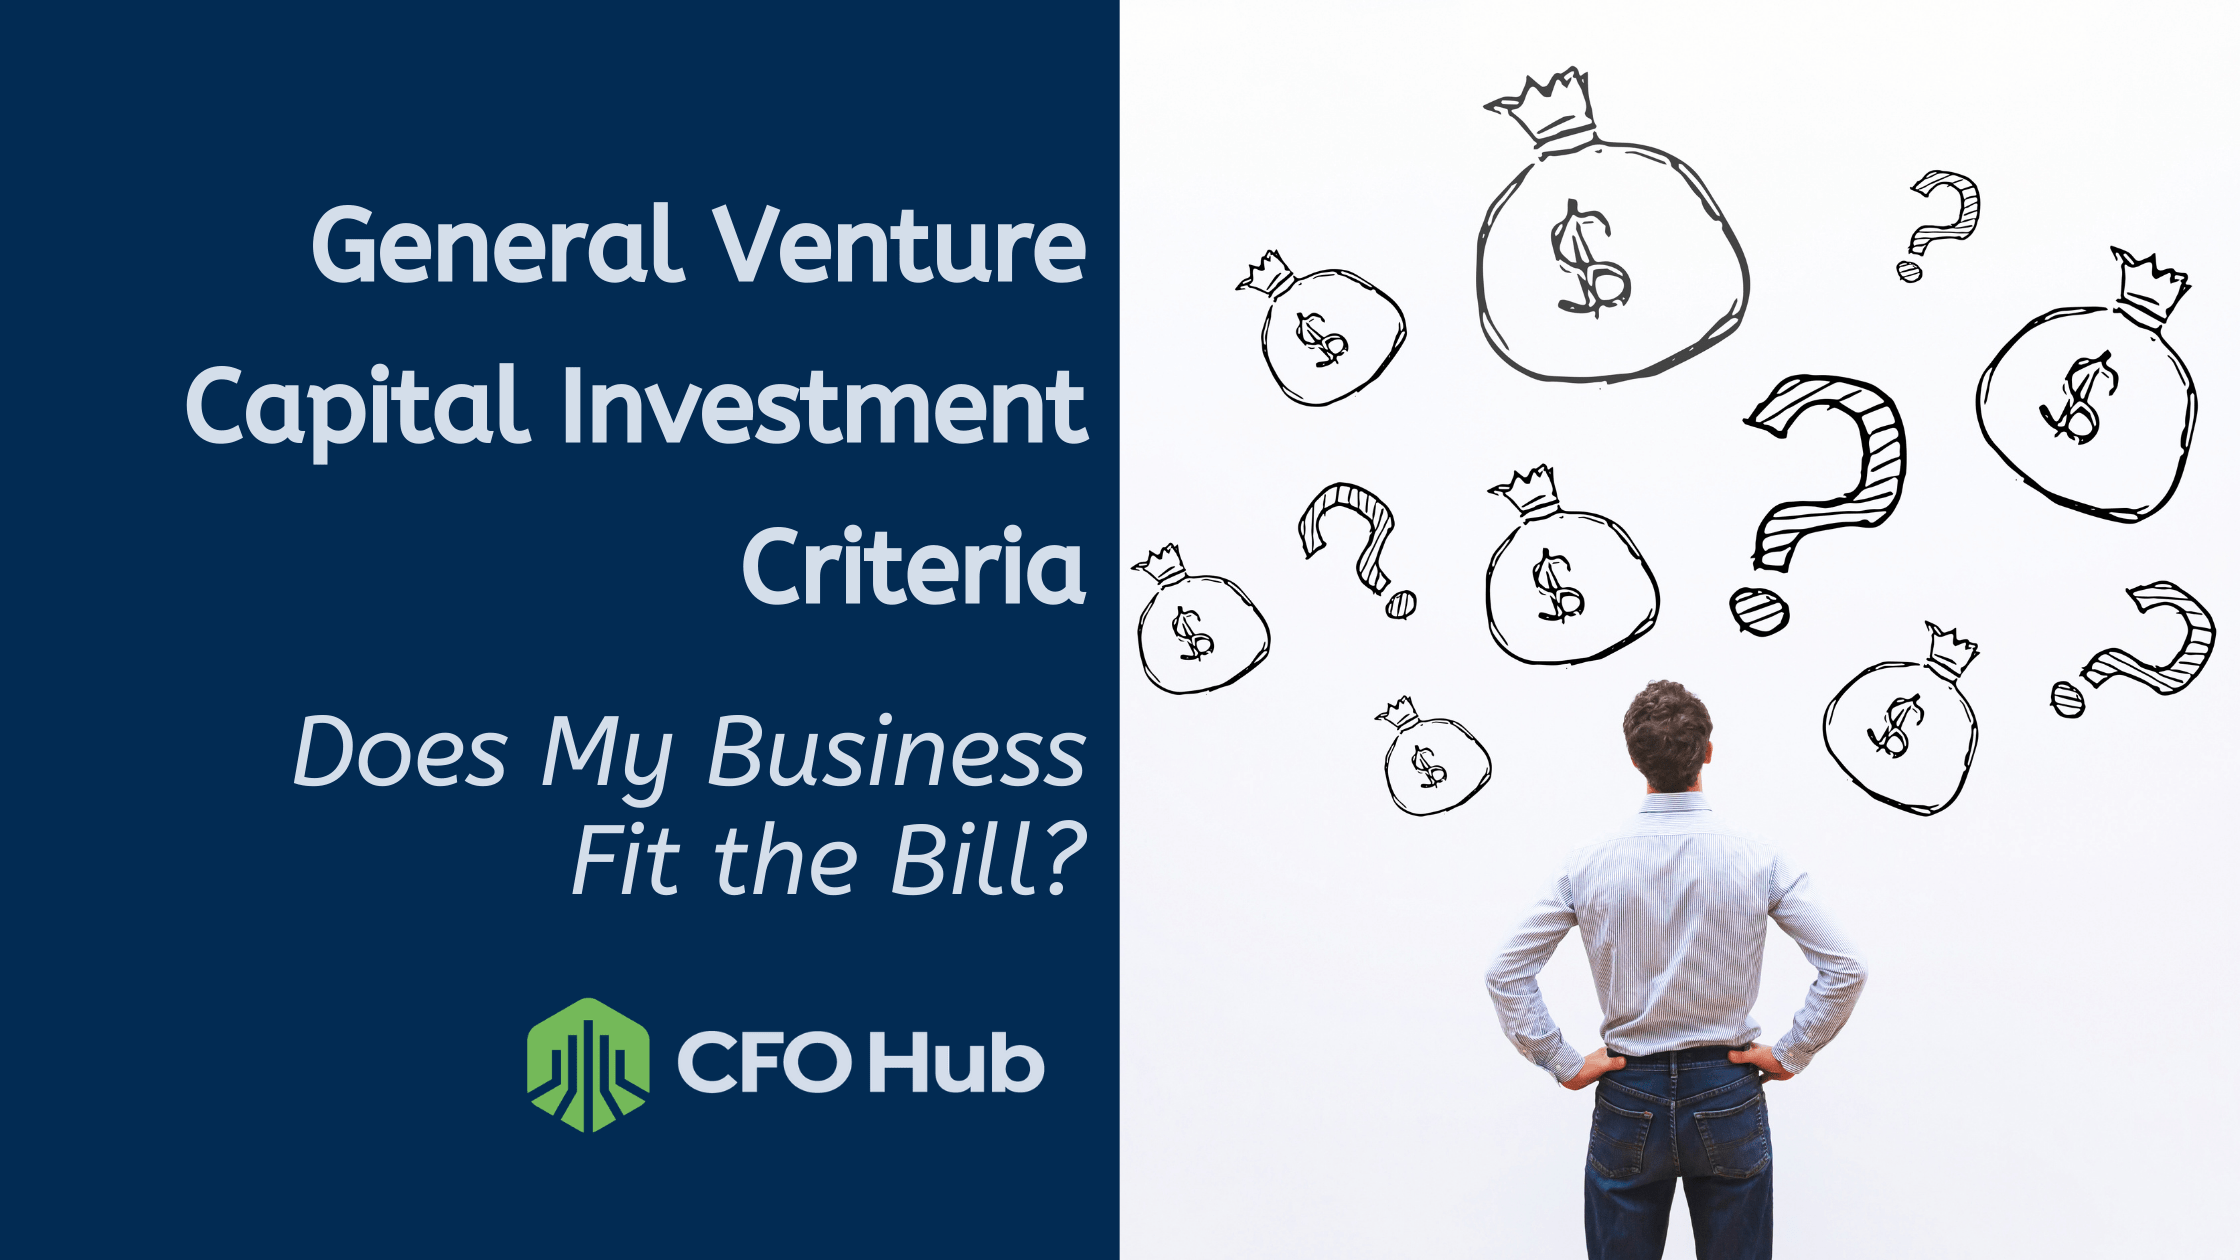 General Venture Capital Investment Criteria. Does My Business Fit